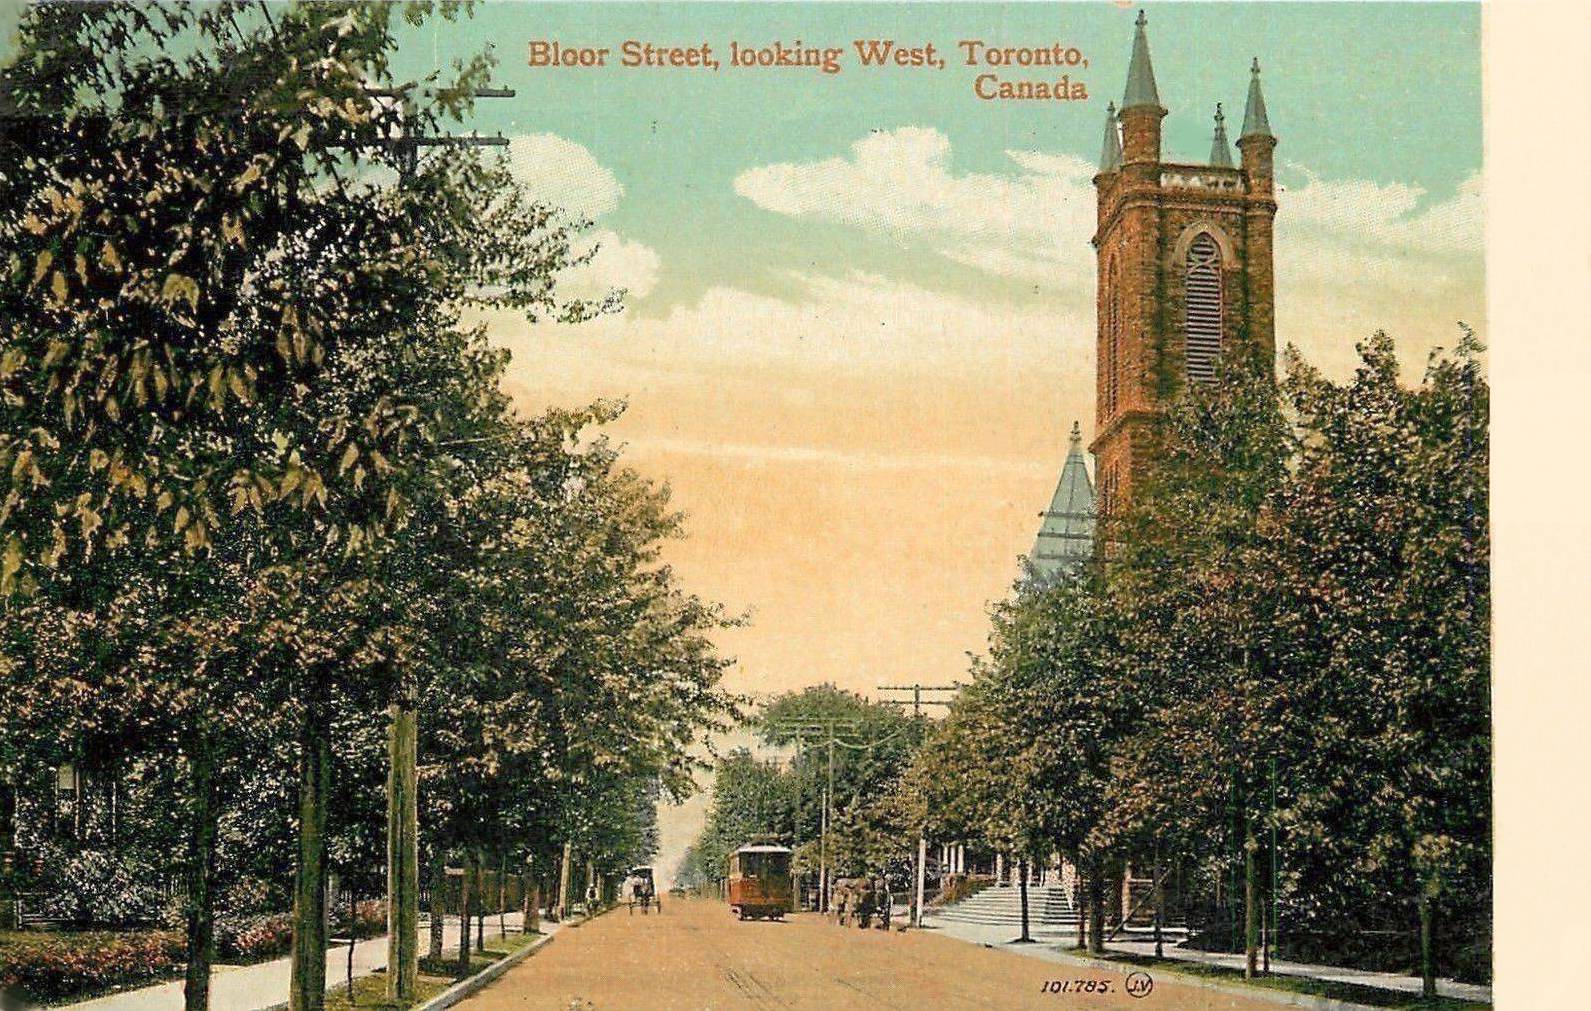 AA POSTCARD - TORONTO - BLOOR STREET - LOOKING W - EXACT LOCATION UNKNOWN - CHURCH AND STREETCAR STOPPED - TINTED - NICE VERSION - 1913